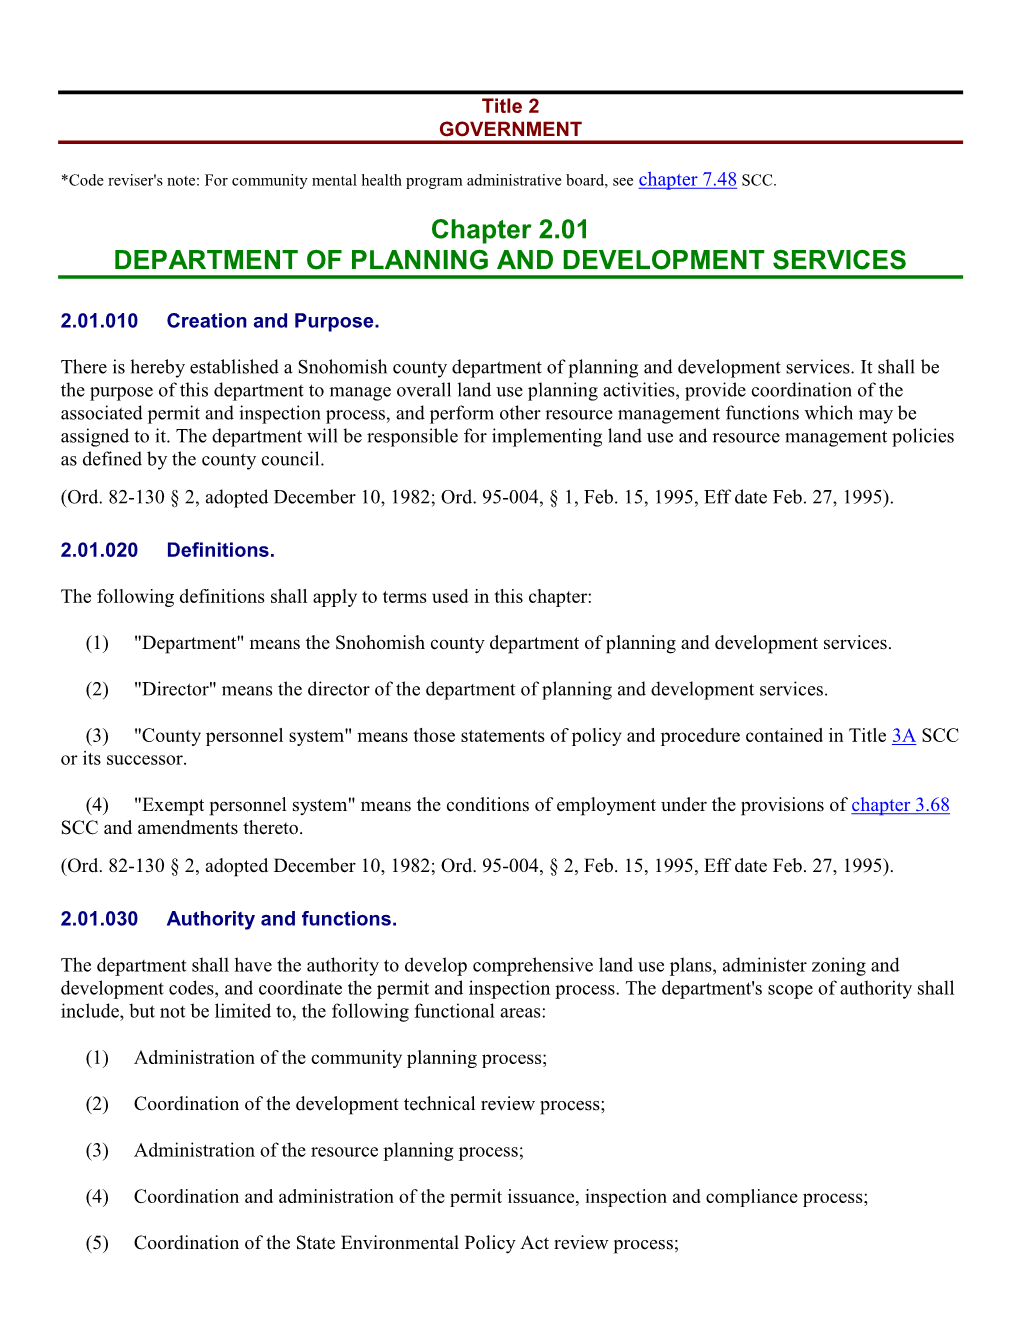 Chapter 2.01 DEPARTMENT of PLANNING and DEVELOPMENT SERVICES